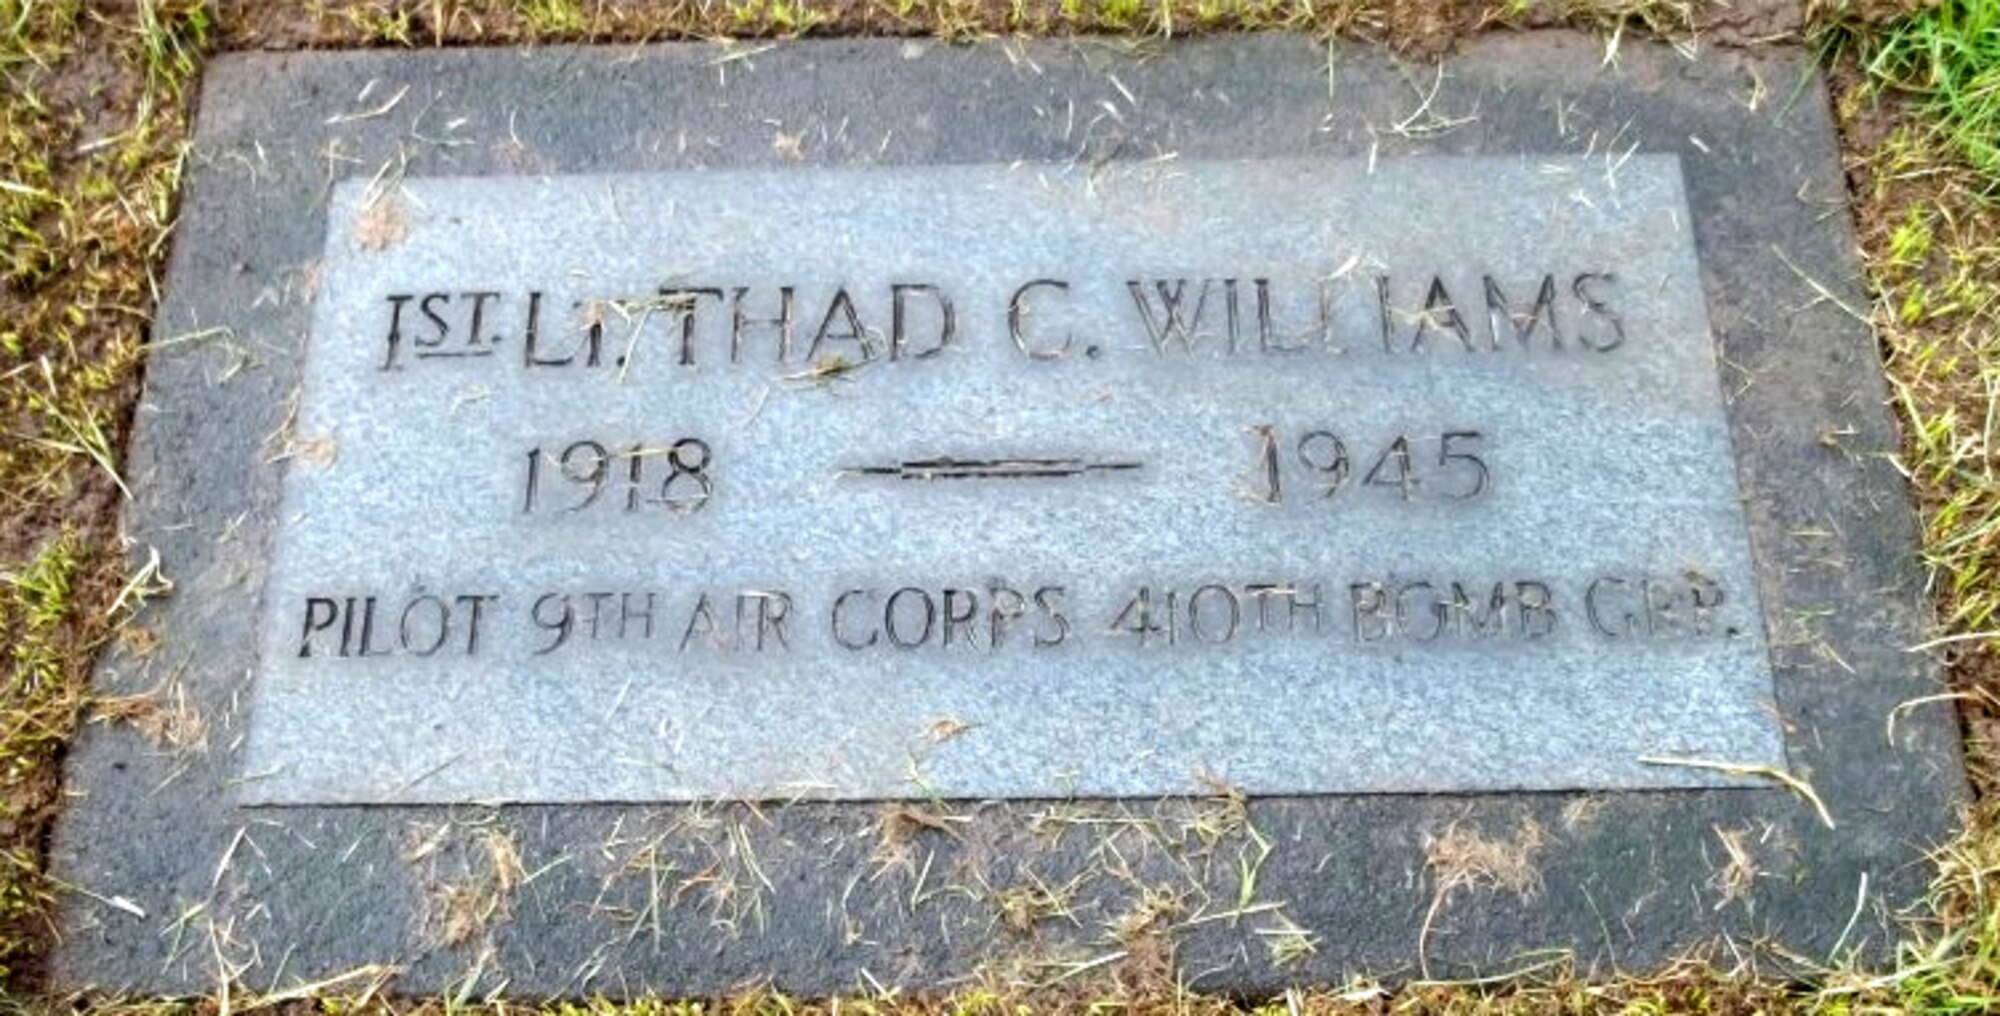 Thad C. Williams, a charter member of Oregon’s 123rd Observation Squadron, became a pilot during World War II and was killed in action in Europe in March, 1945.  He is buried at the Riverview Cemetery, in Portland, Oregon.  (Courtesy Mr. James Burke)